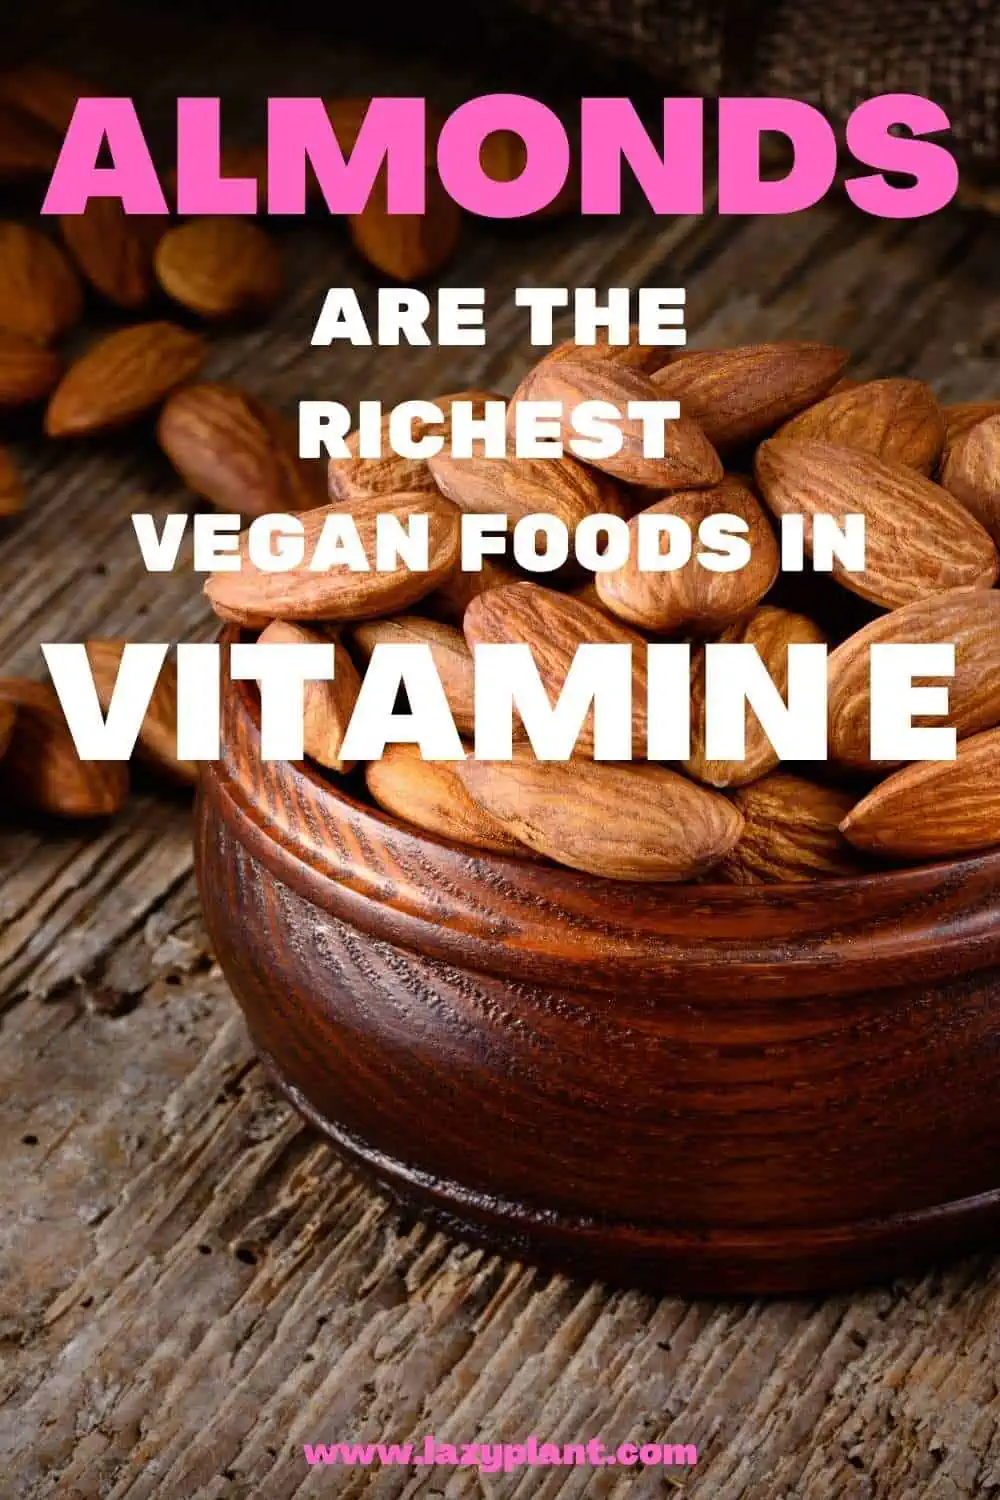 Does a handful of almonds provide enough vitamin E to meet our daily needs?